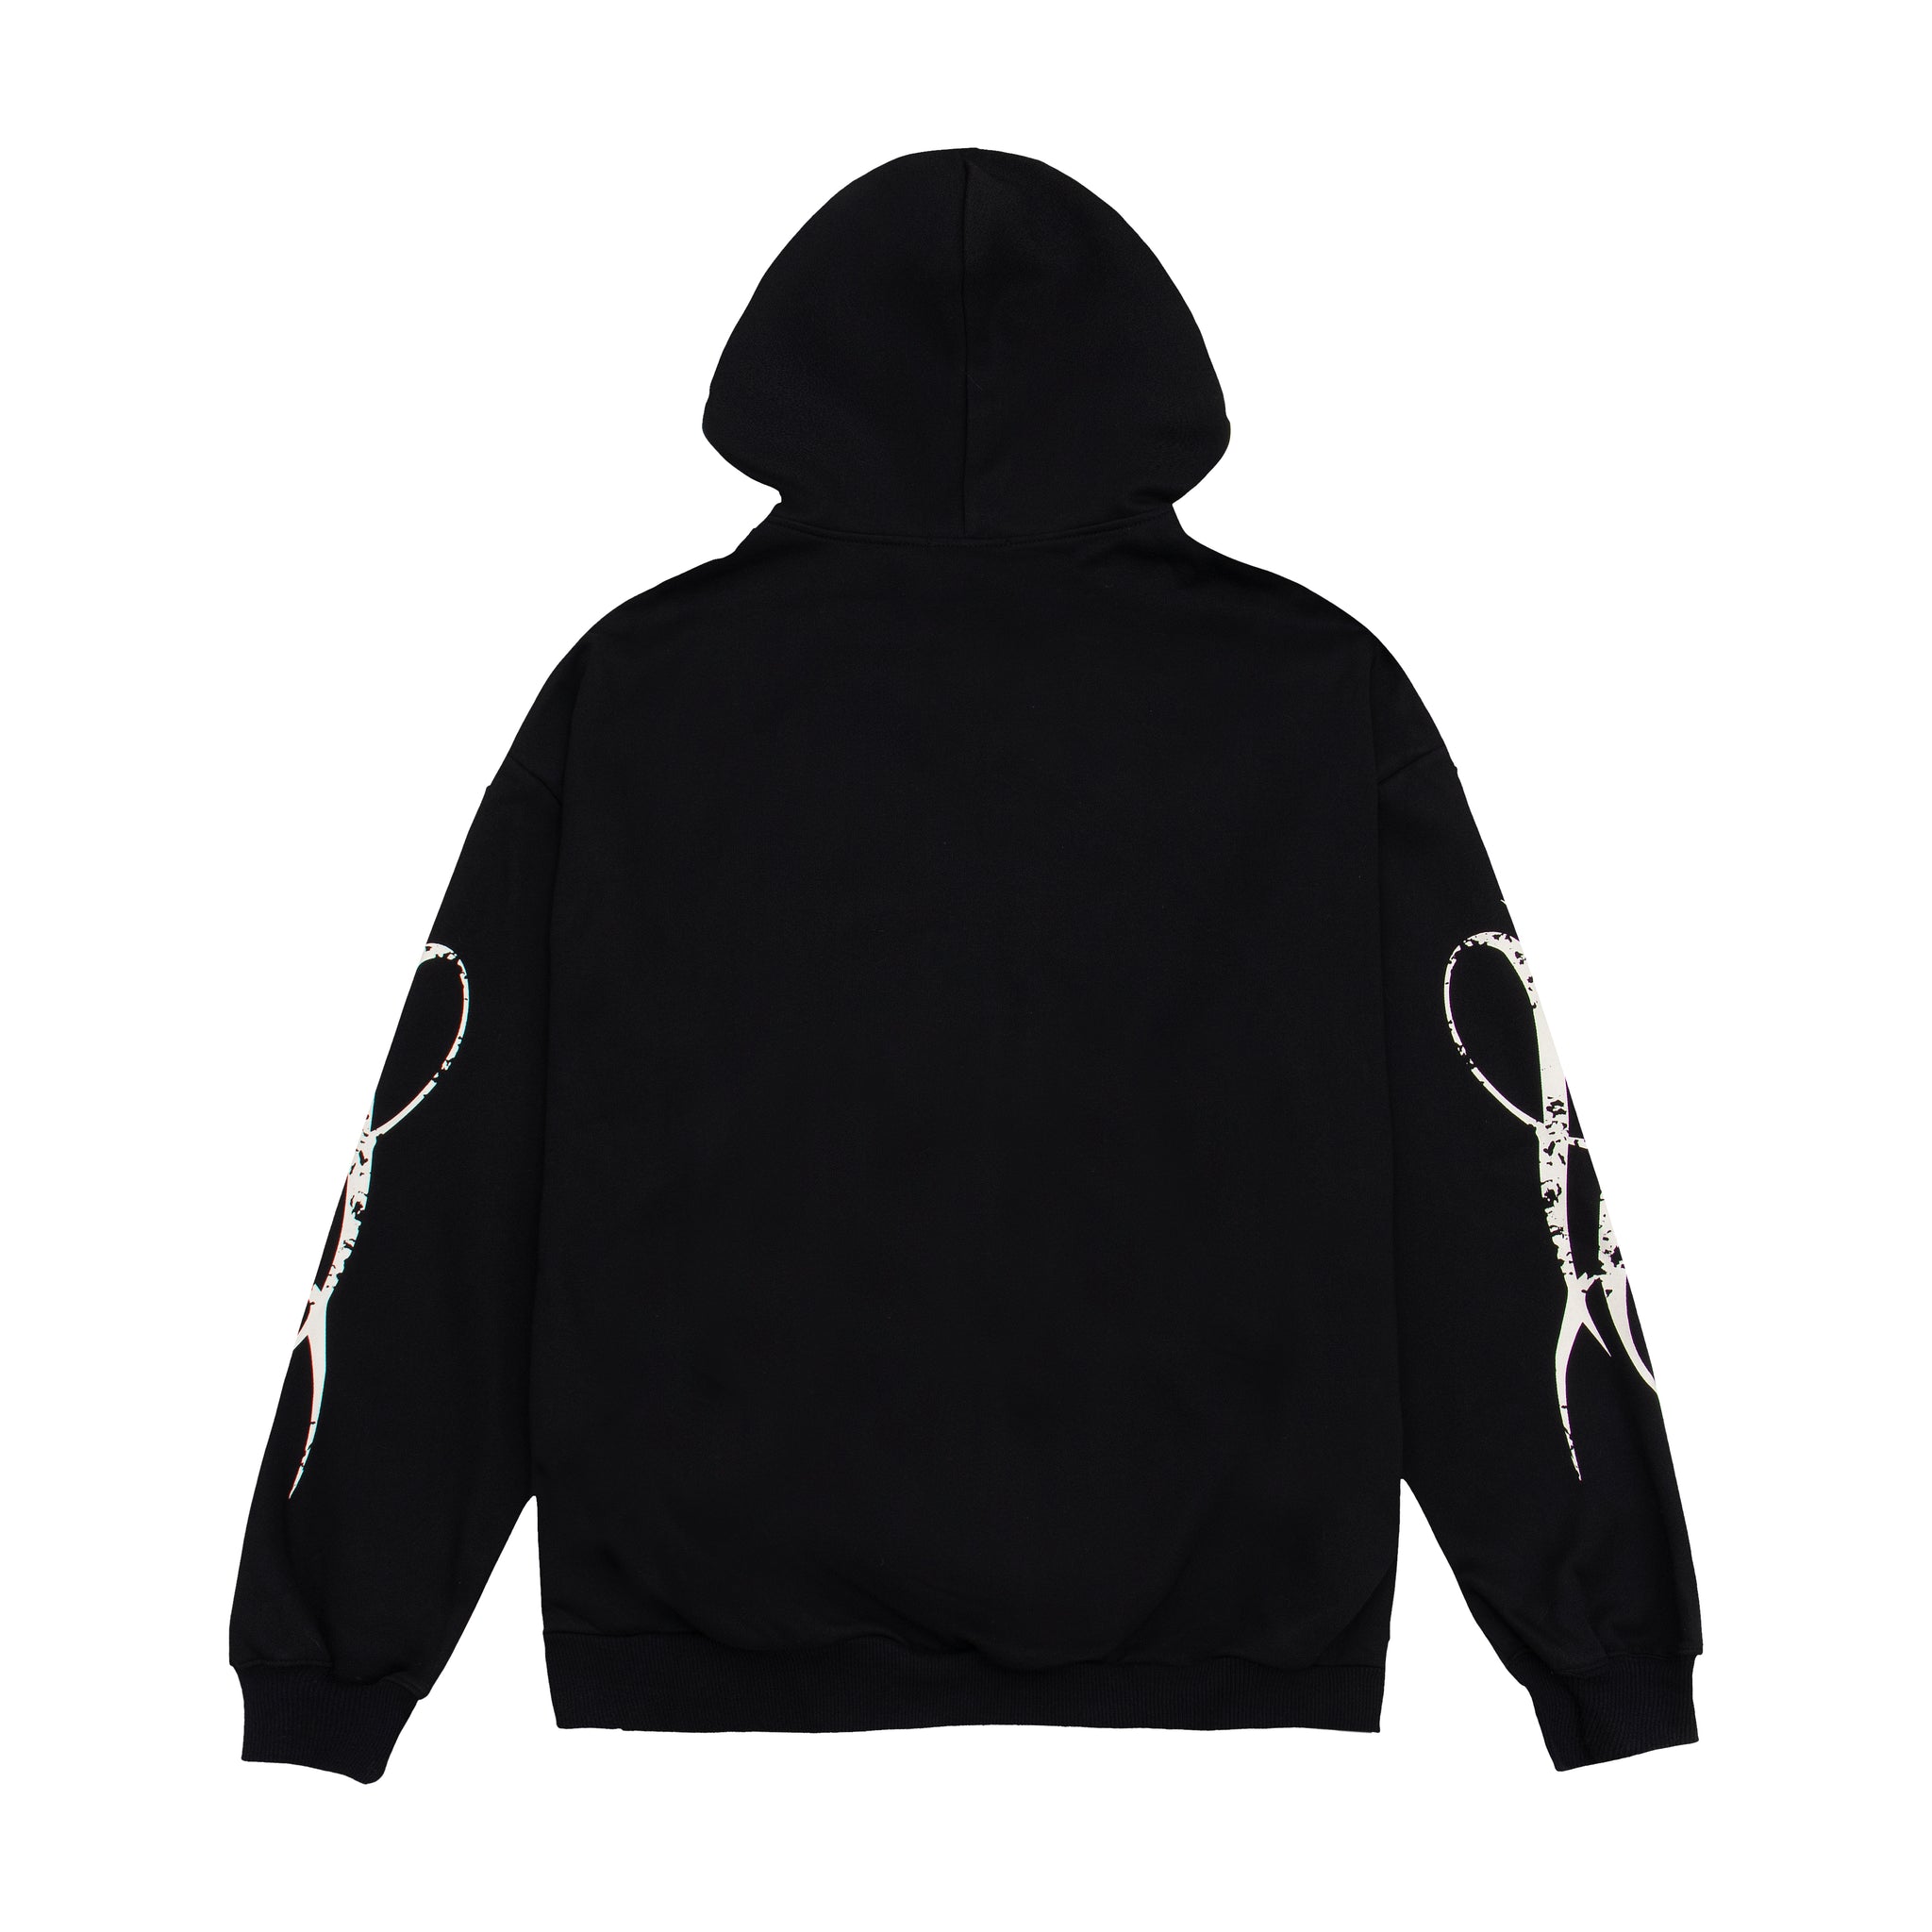 Nokwal Zip Up Oversize Hoodie - Black - XL Only